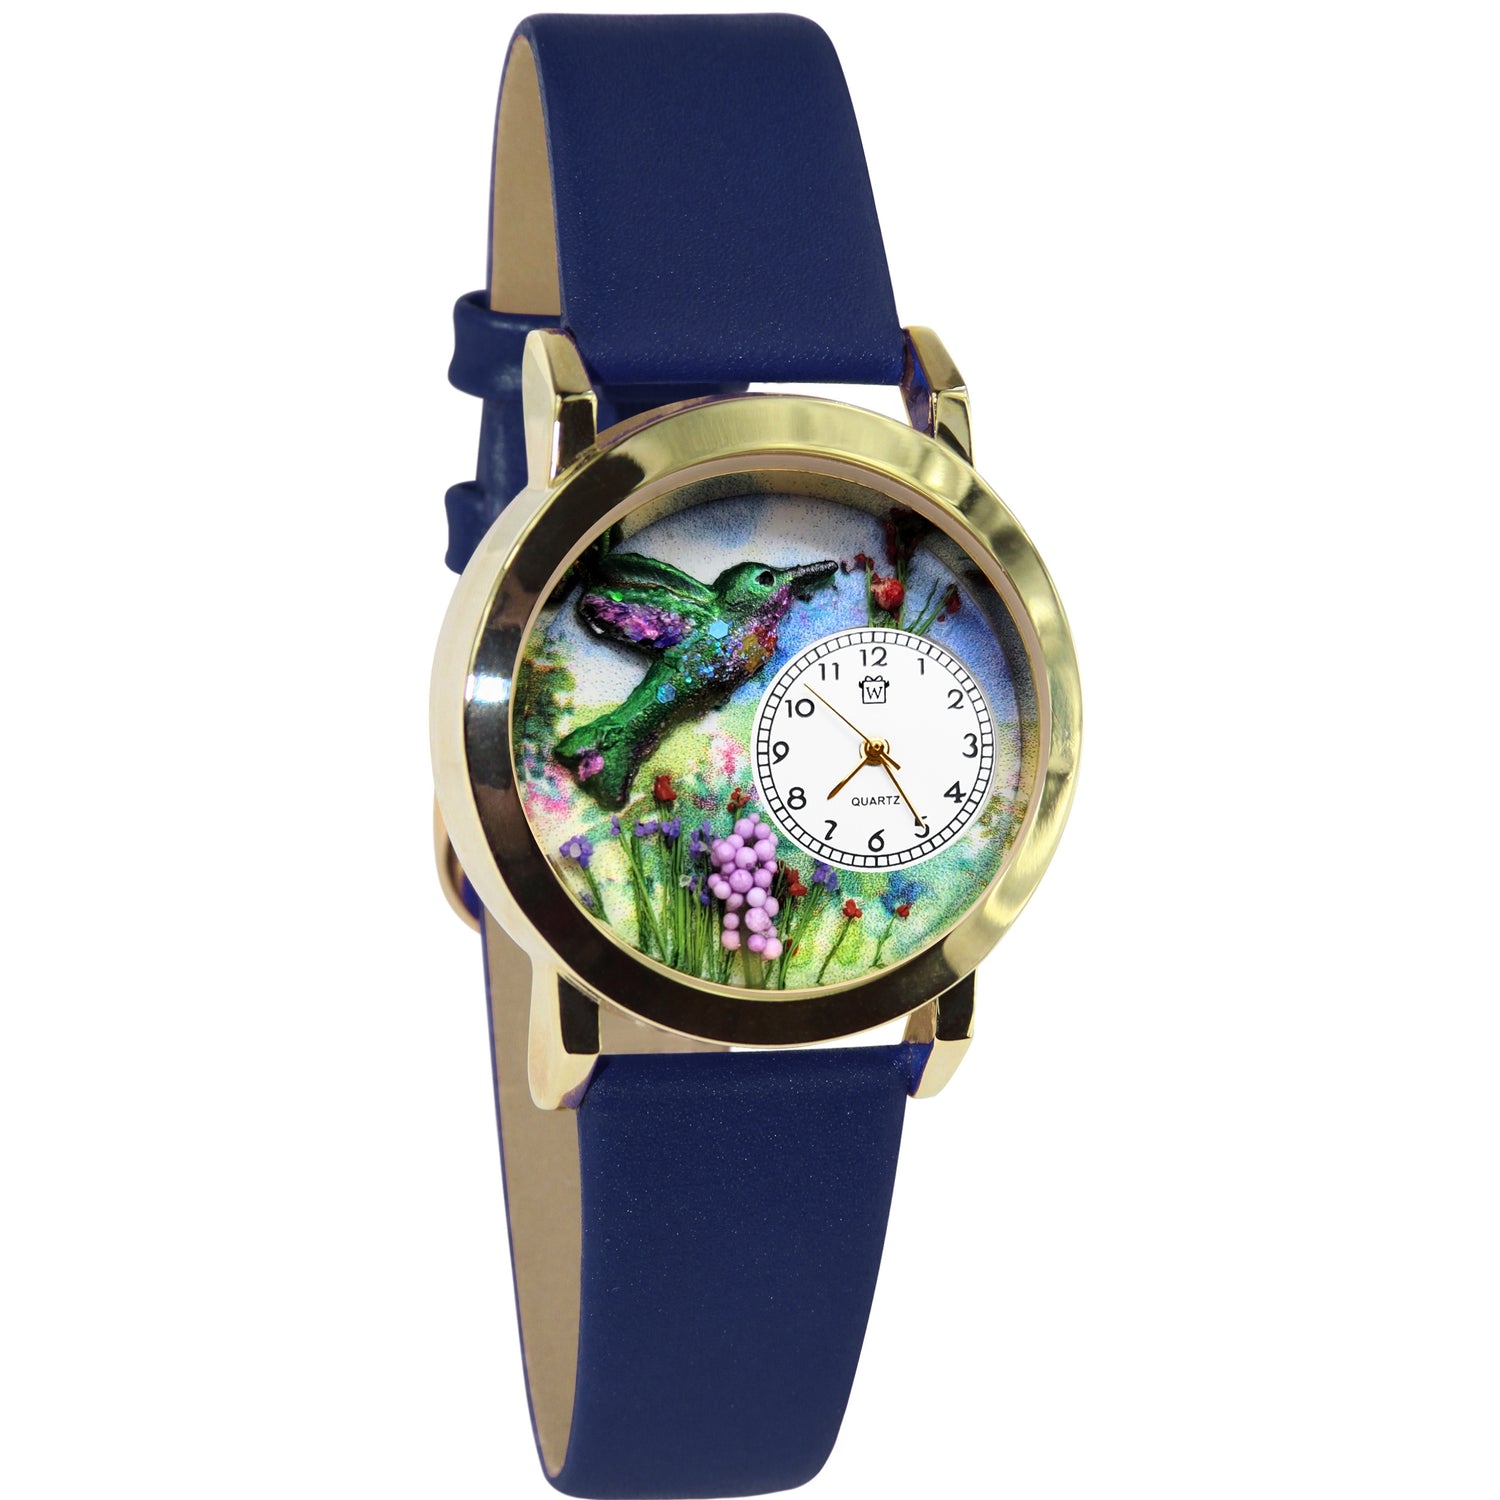 Whimsical Gifts | Hummingbirds 3D Watch Small Style | Handmade in USA | Animal Lover | Outdoor & Garden | Novelty Unique Fun Miniatures Gift | Gold Finish Navy Leather Watch Band